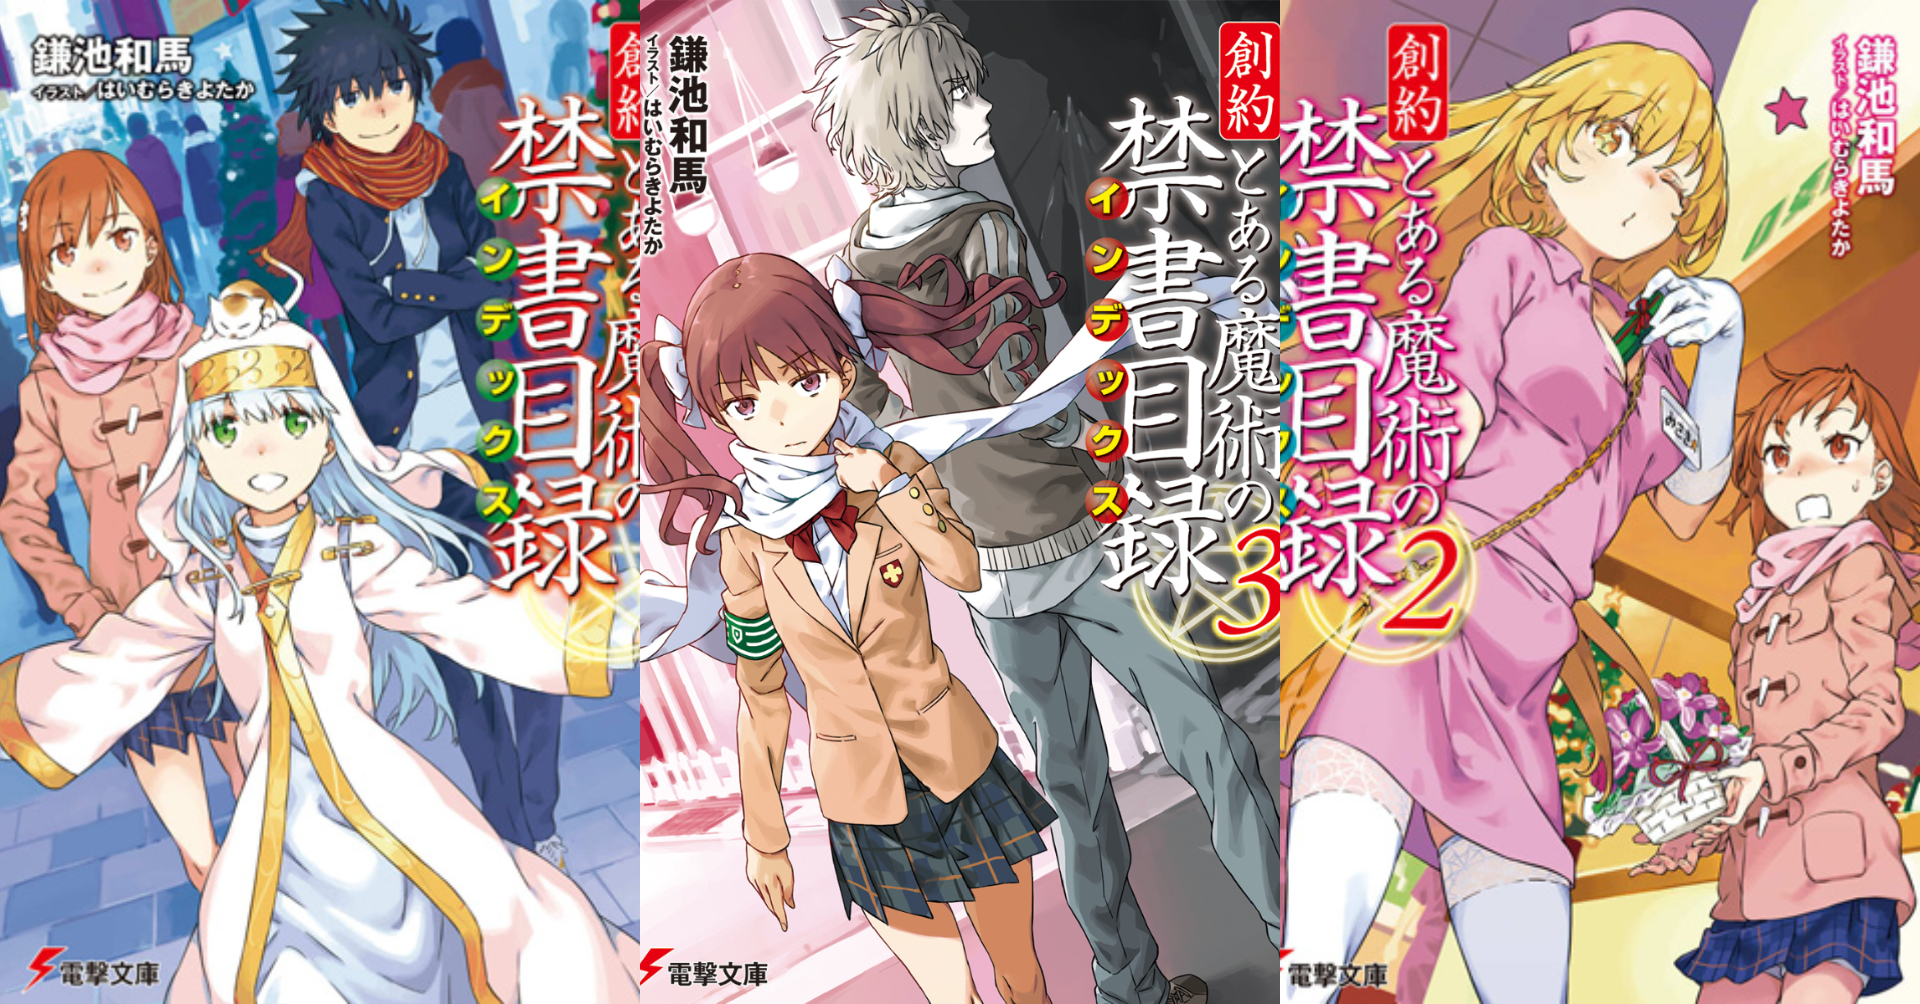 A Certain Magical Index: Genesis Testament Volume 3 Is Top 2 Best Selling Light  Novel in Amazon Japan - Anime Corner